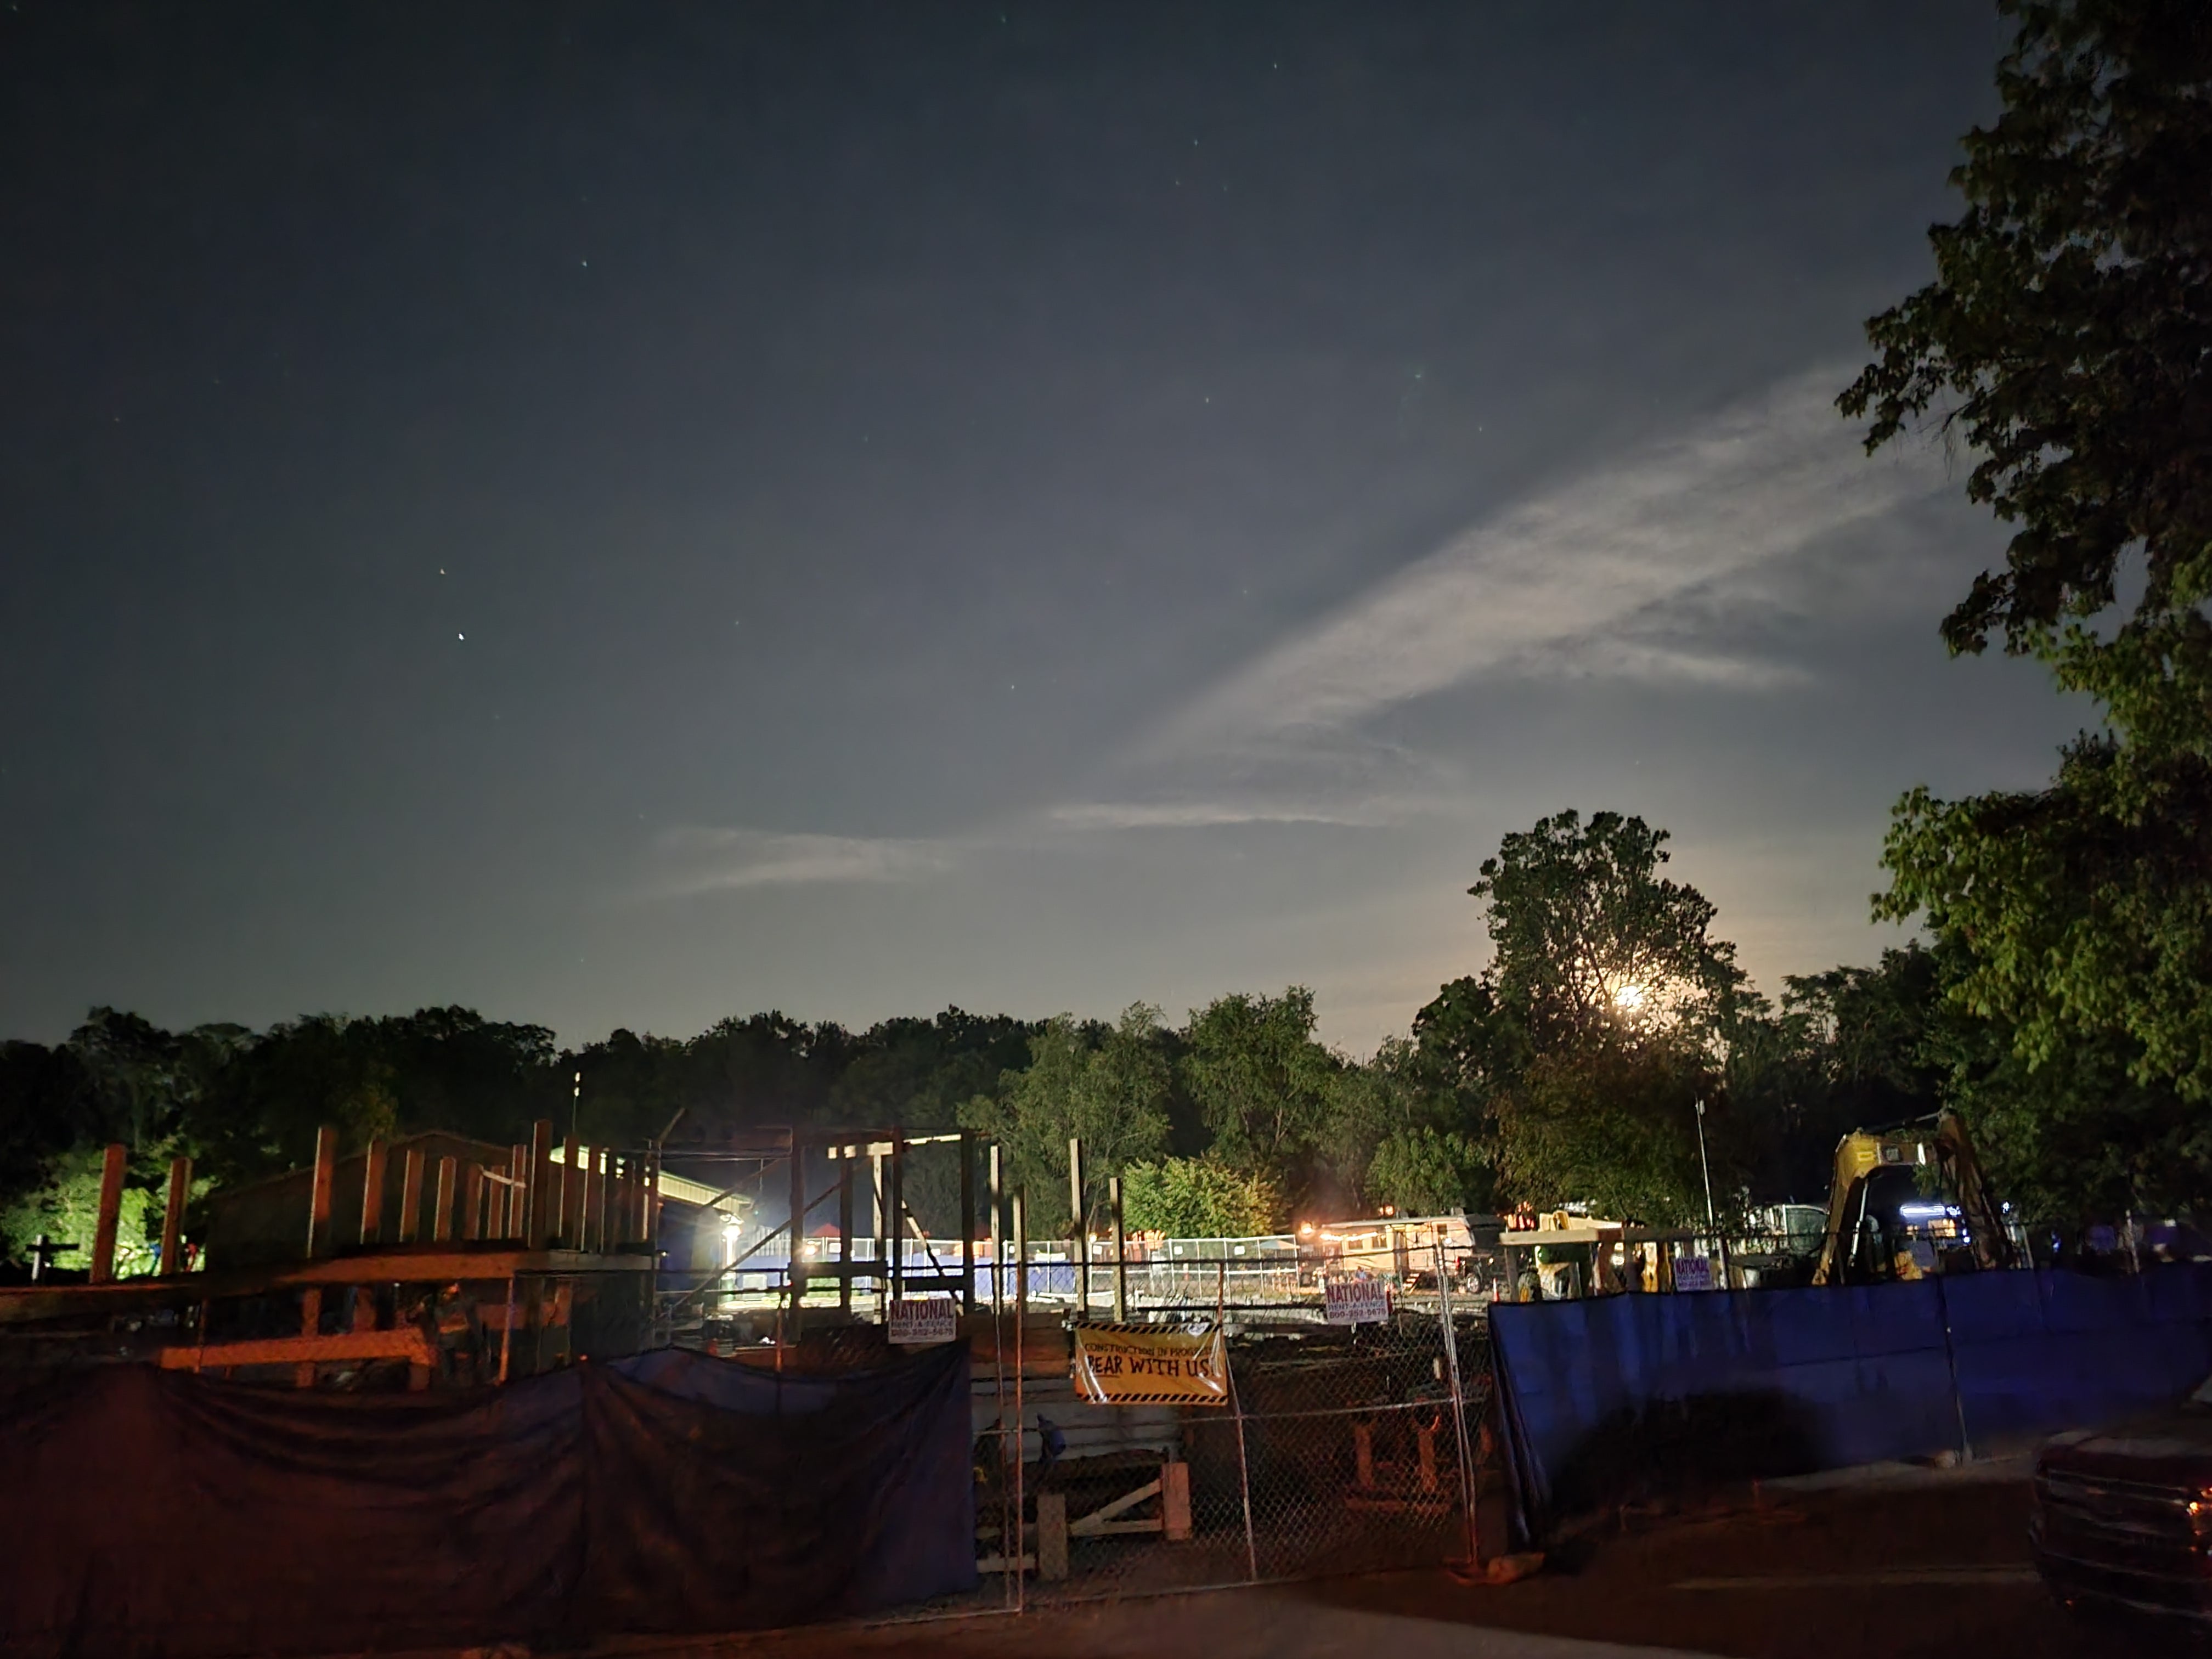 Camper submitted image from Yogi Bear's Jellystone Park in Hagerstown MD - 5